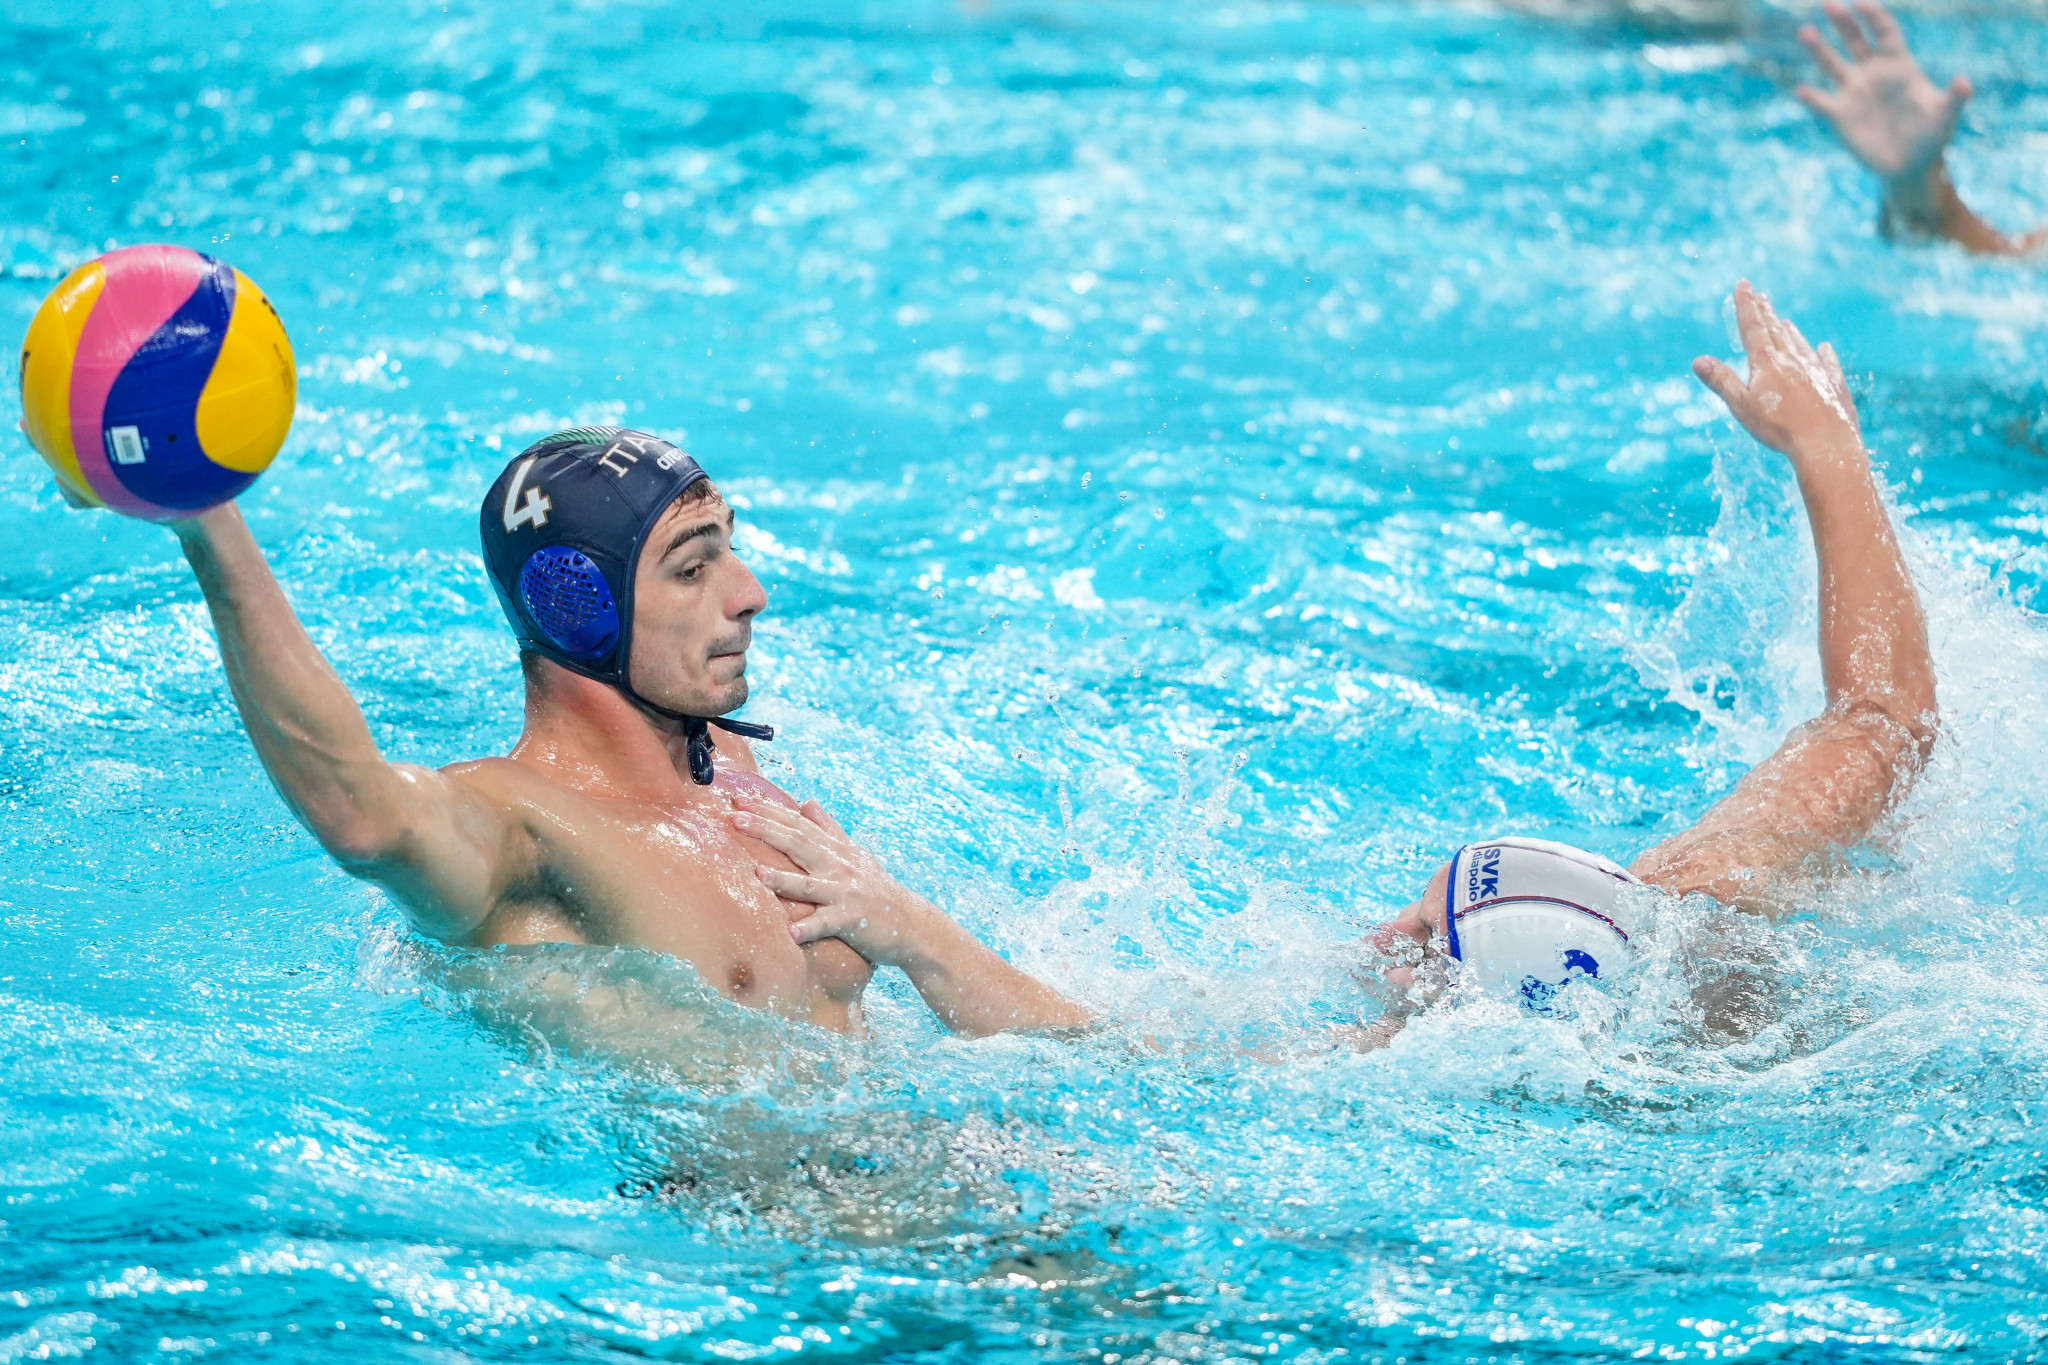 Men's water polo preliminaries continued today, with matches including Italy against Slovakia ©FISU